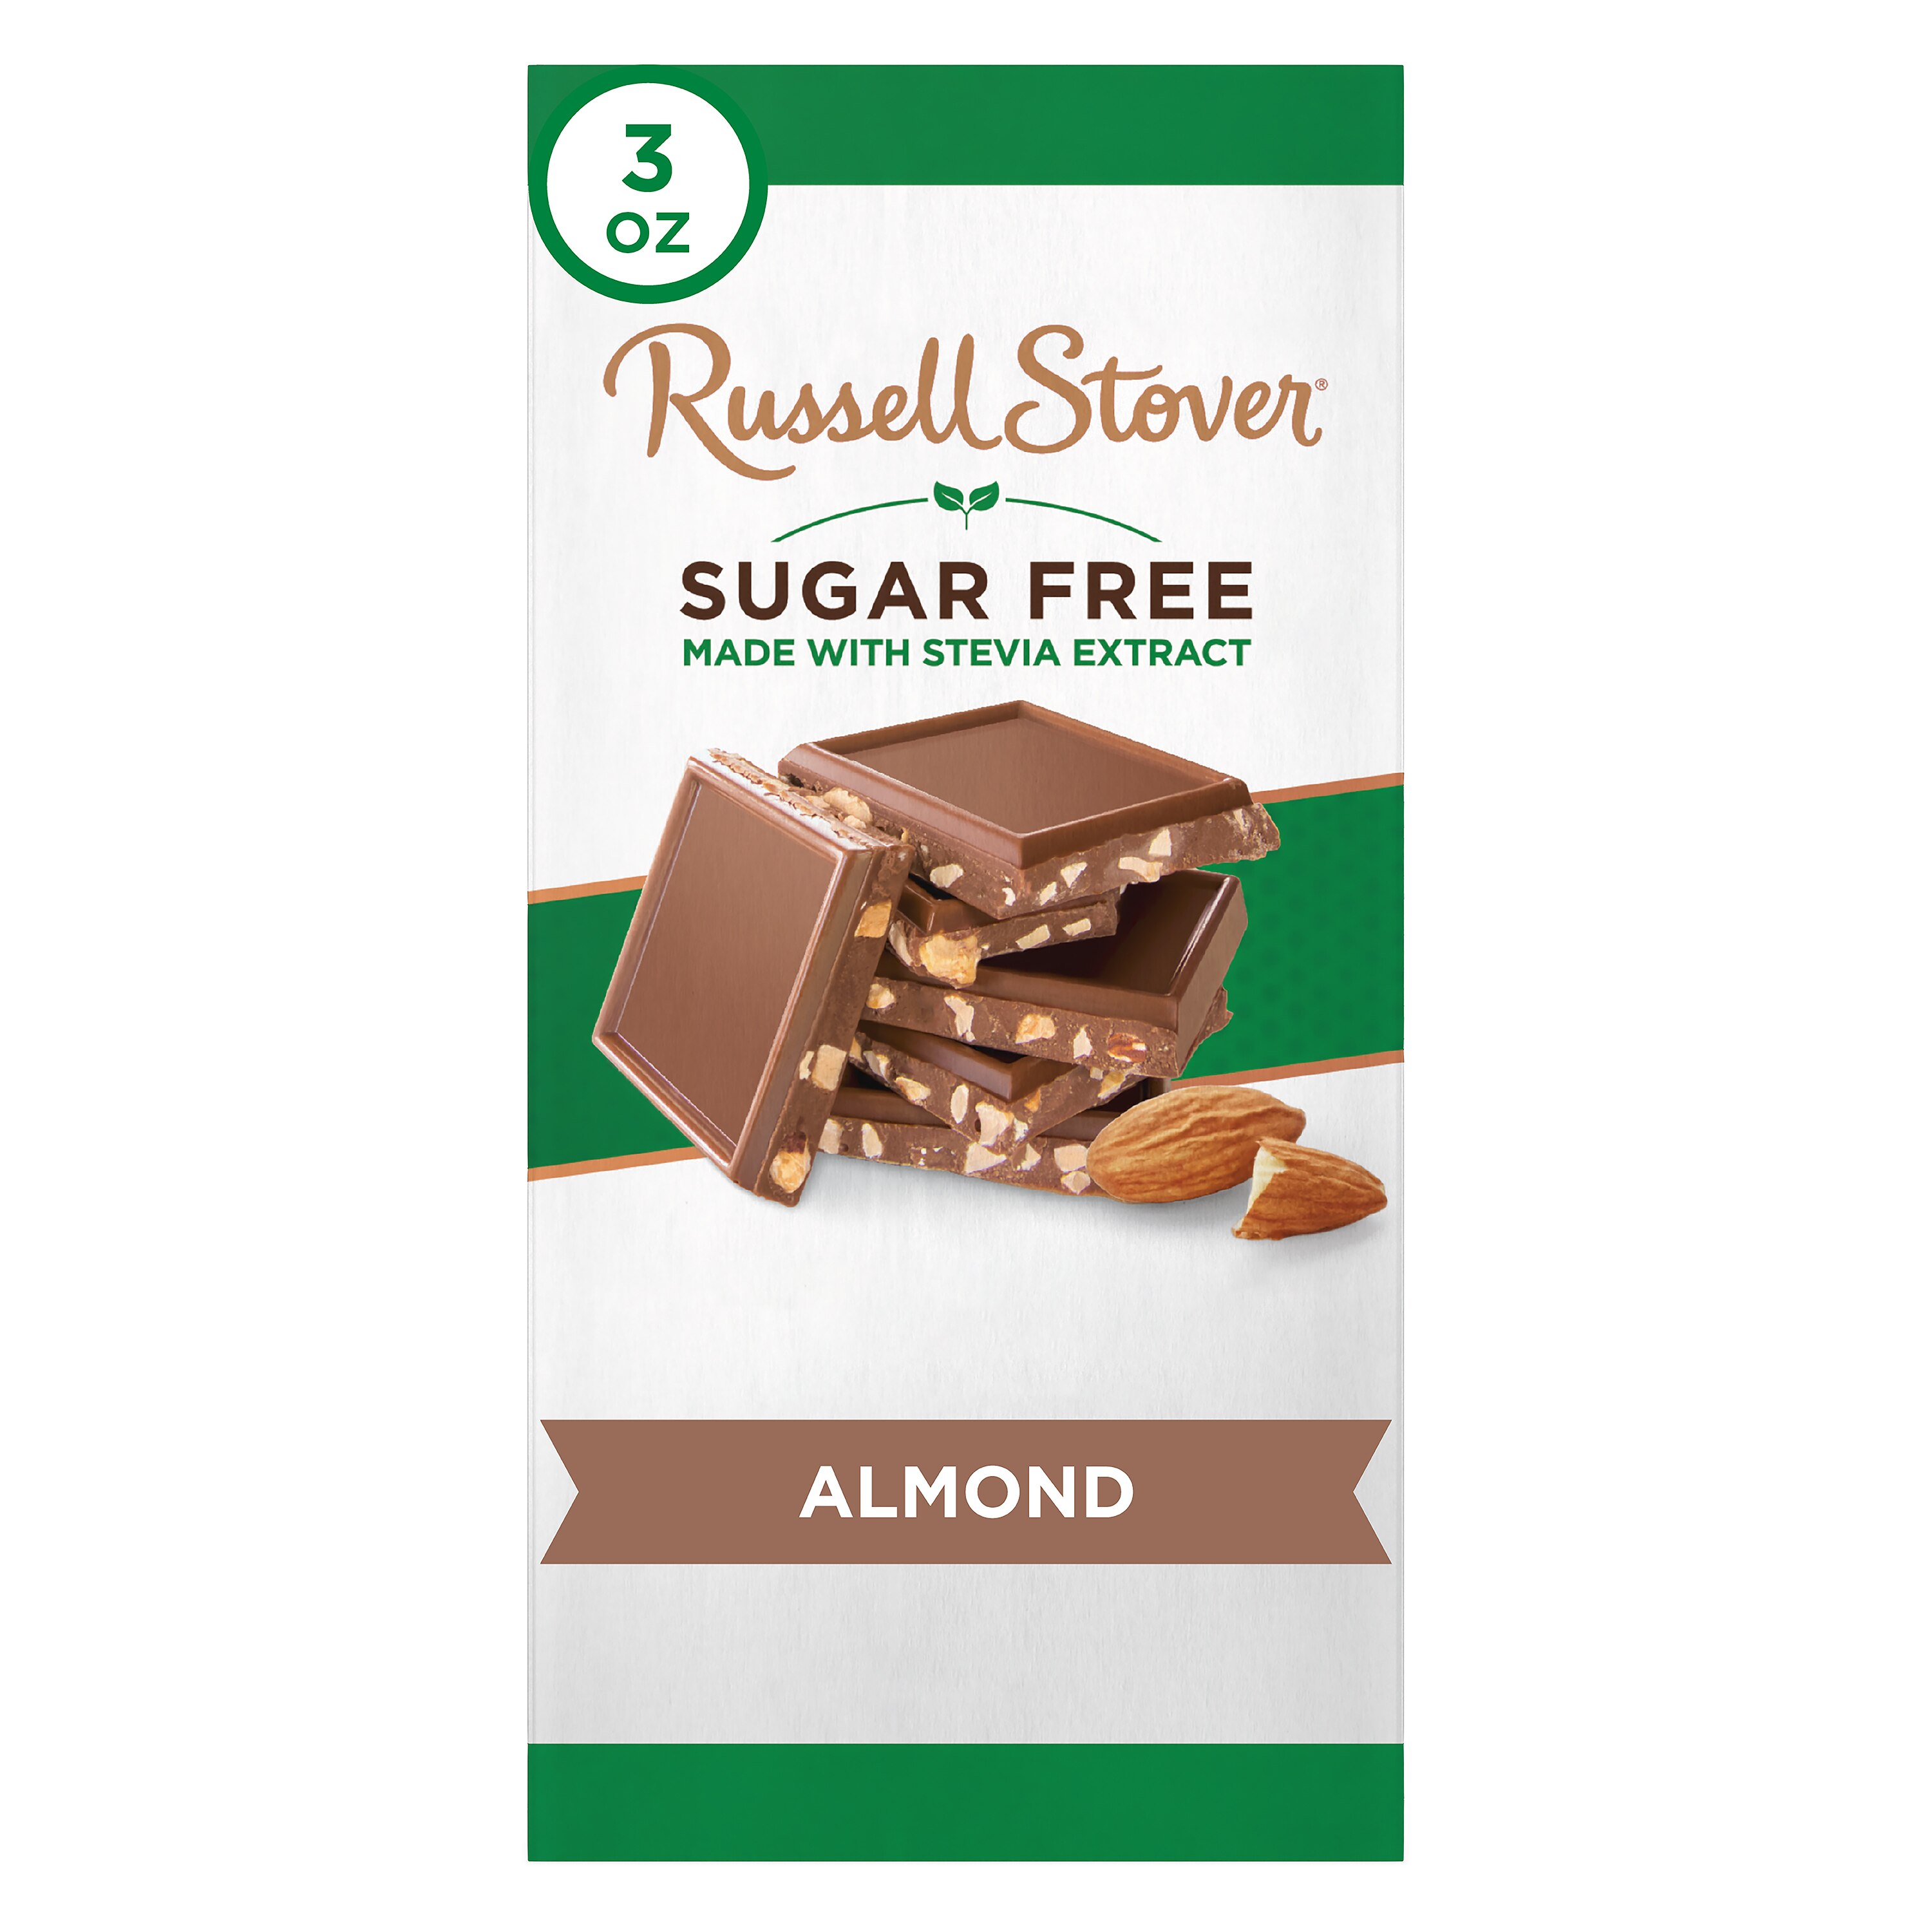 RUSSELL STOVER Sugar Free Almond Chocolate Candy Bar, 3 oz.